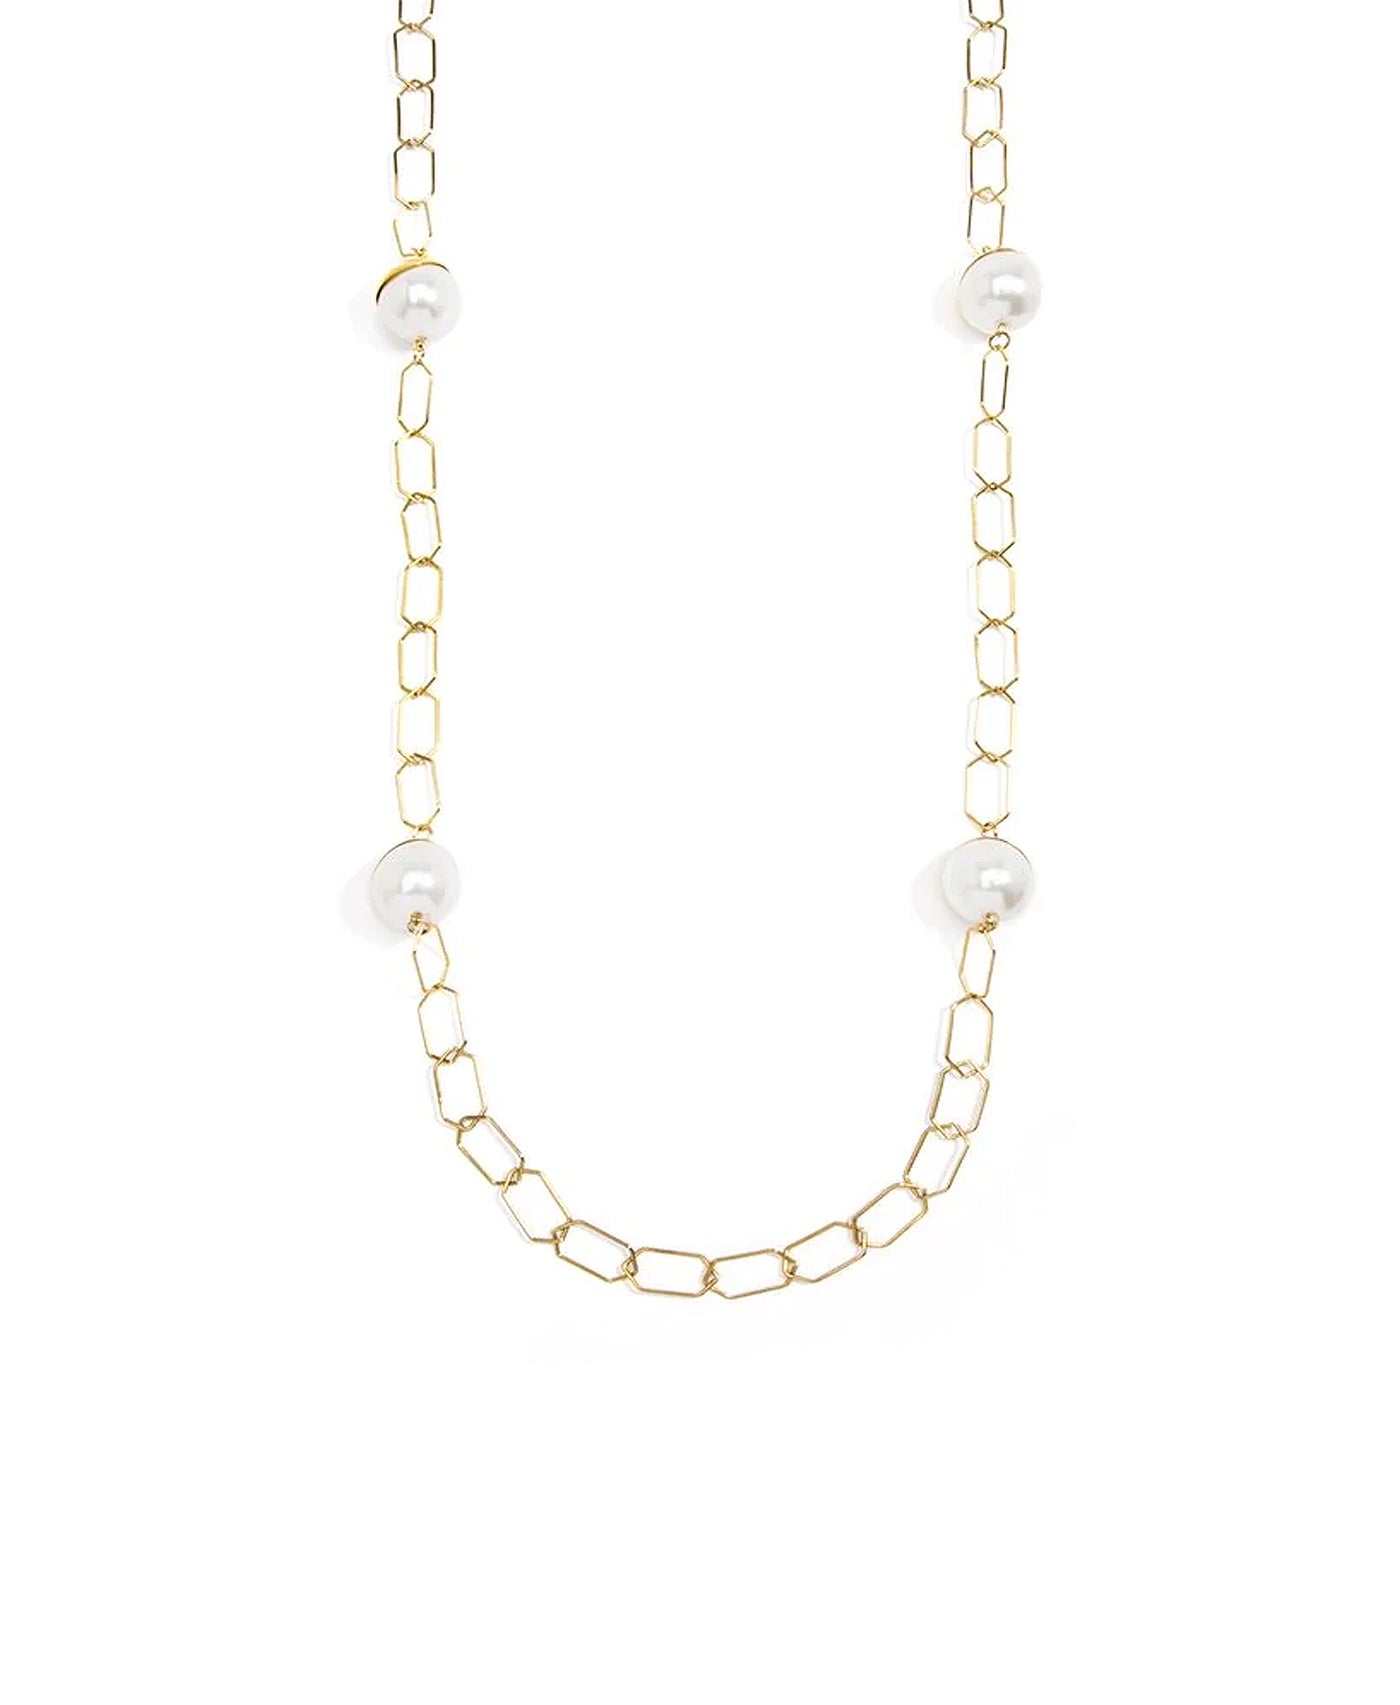 Long Geometric Link & Faux Pearl Necklace image 1